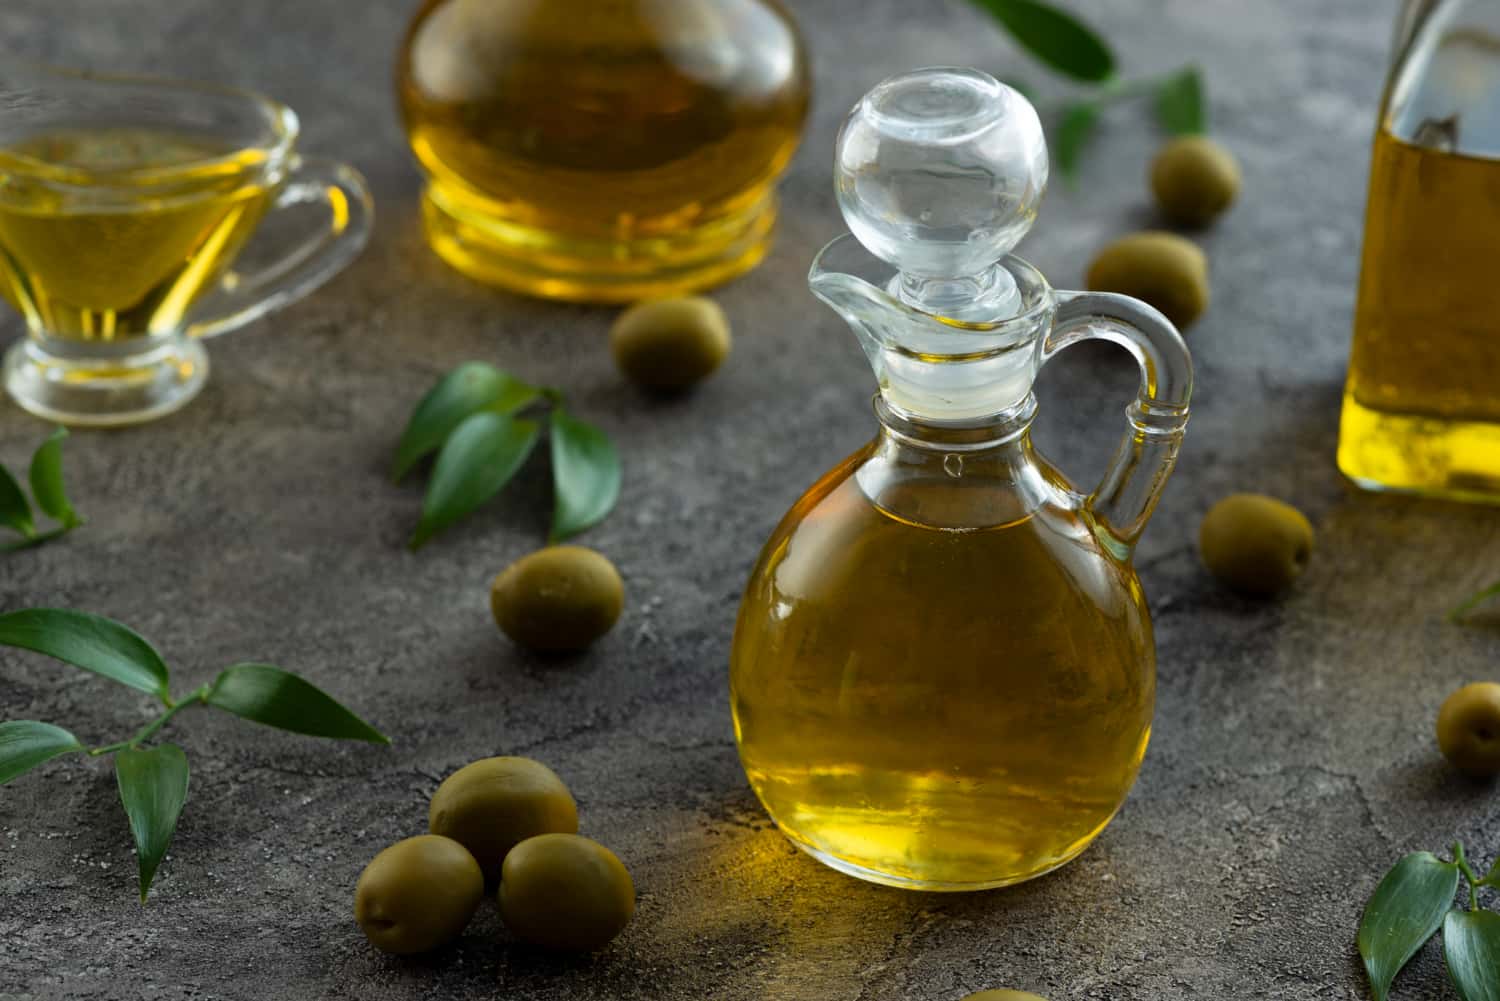 How to know if olive oil is healthy